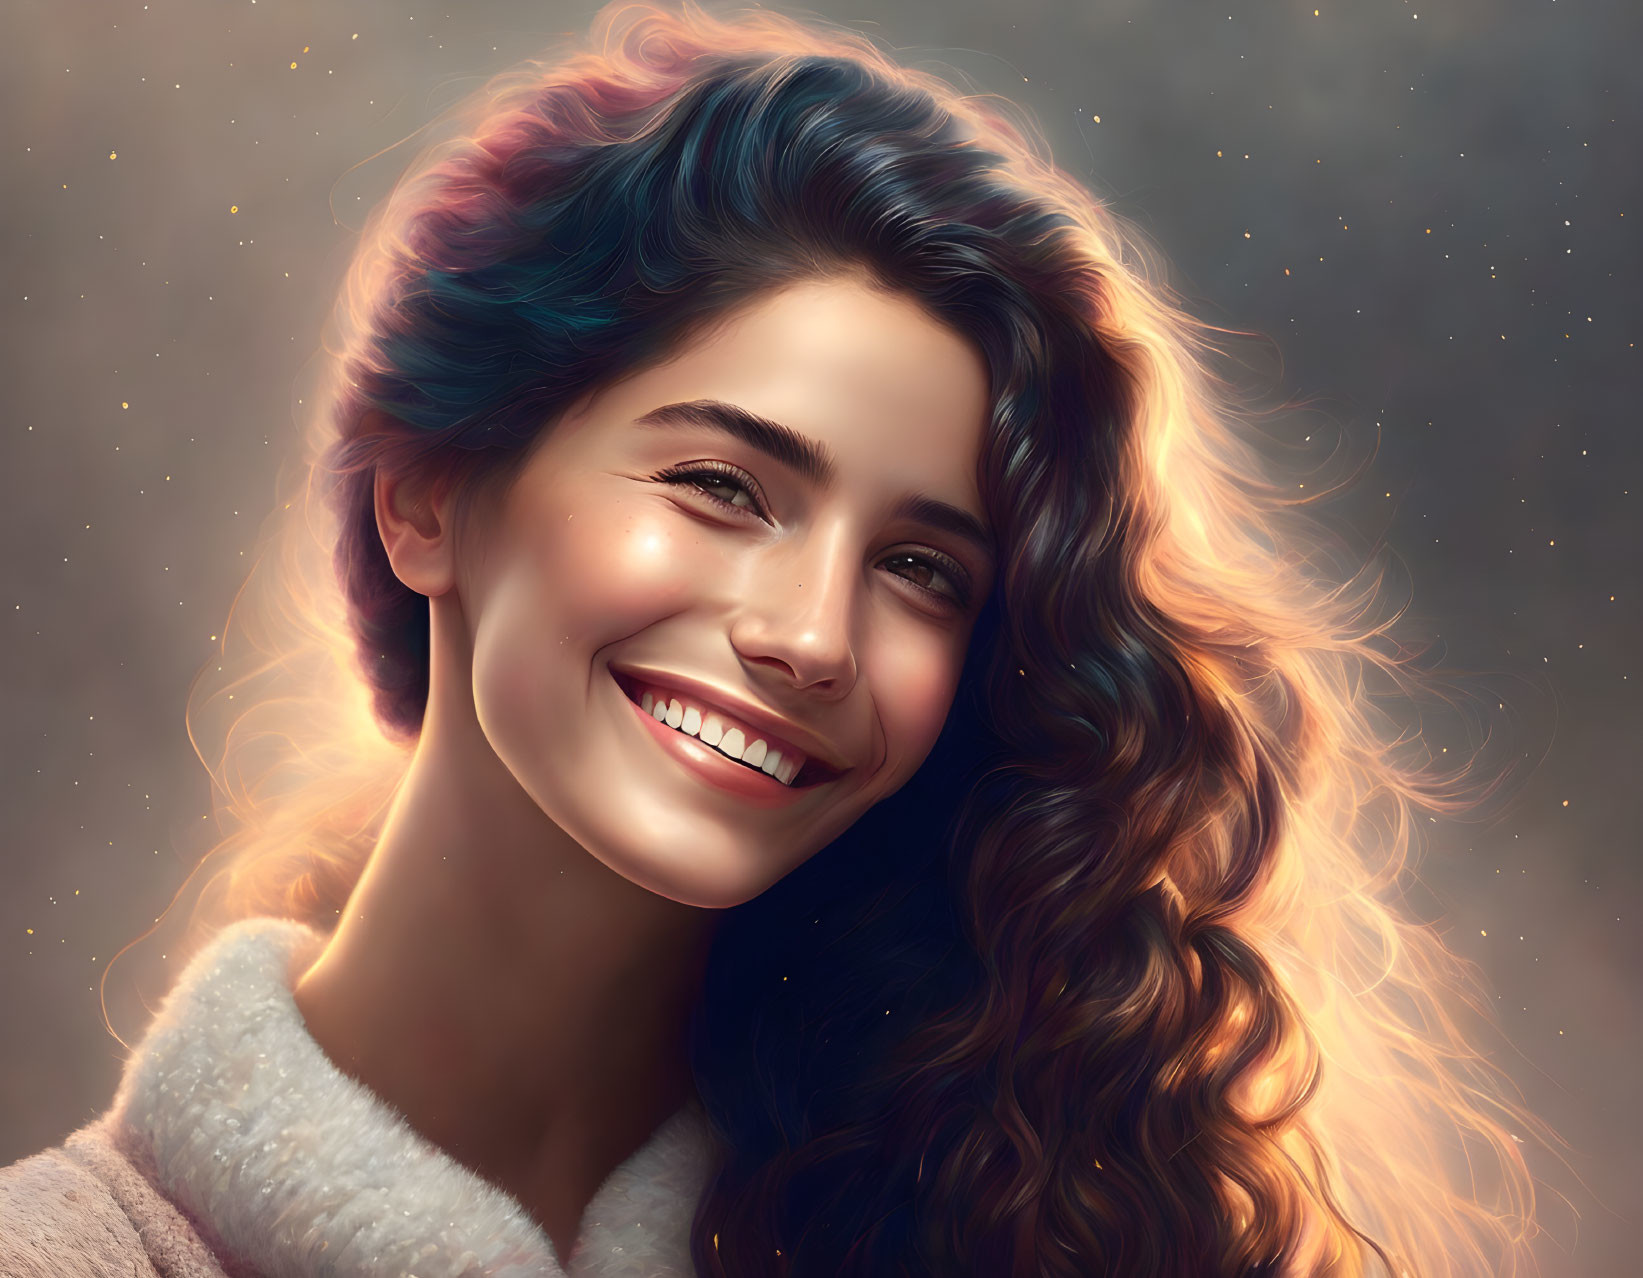 Colorful digital painting of a woman with radiant smile and cosmic background